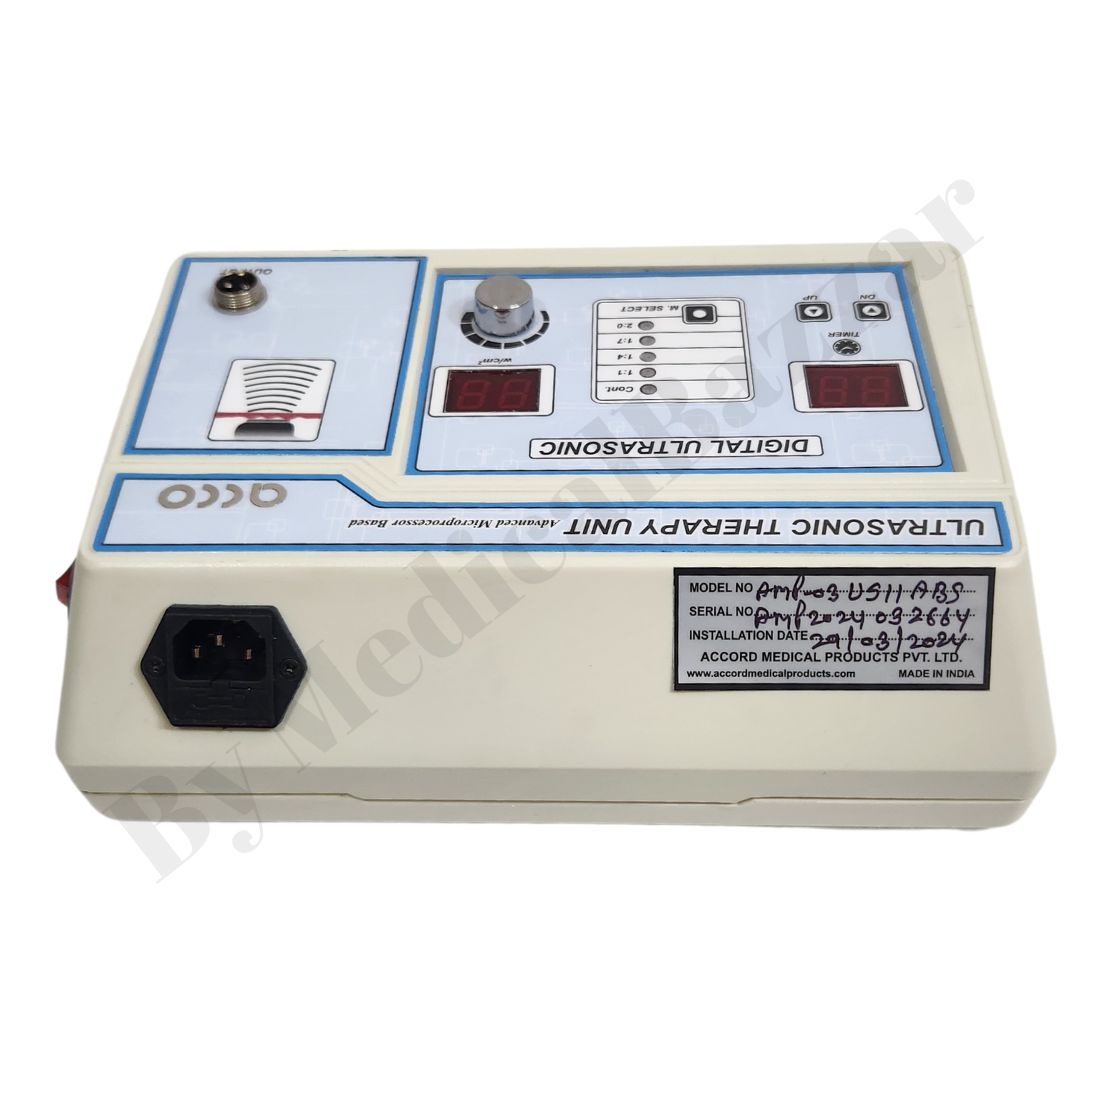 acco Ultrasound Therapy Unit (1Mhz LED) ABS Body